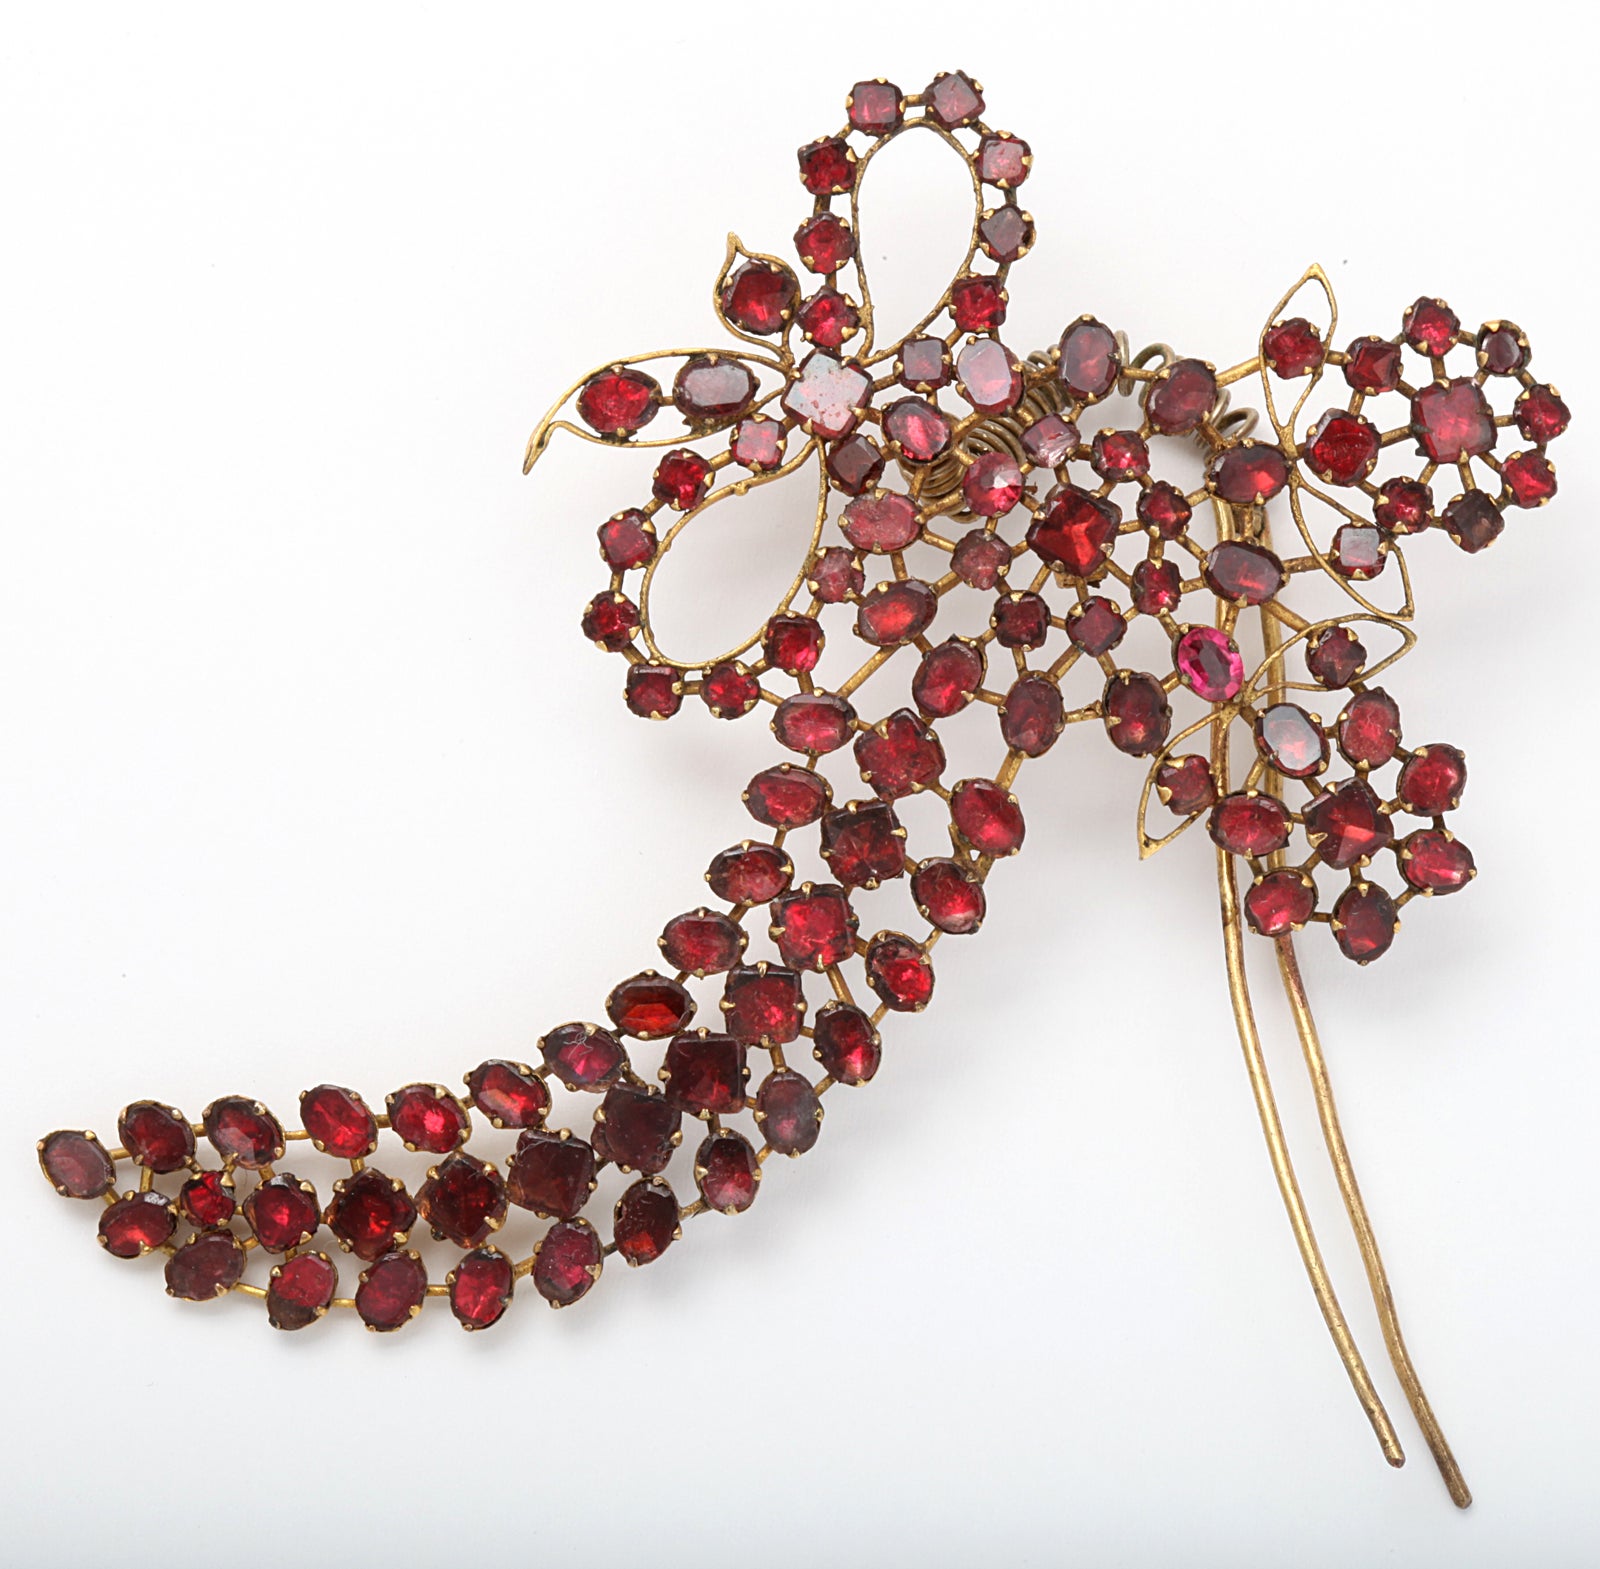 Faceted rose foiled almondine garnets, in a delicious life saver red, form a fancy bow for your hair. The hair comb is attached to a spring so that the aigrette moves or flutters, en tremblant, when worn. Aigrettes were popular in the Georgian era